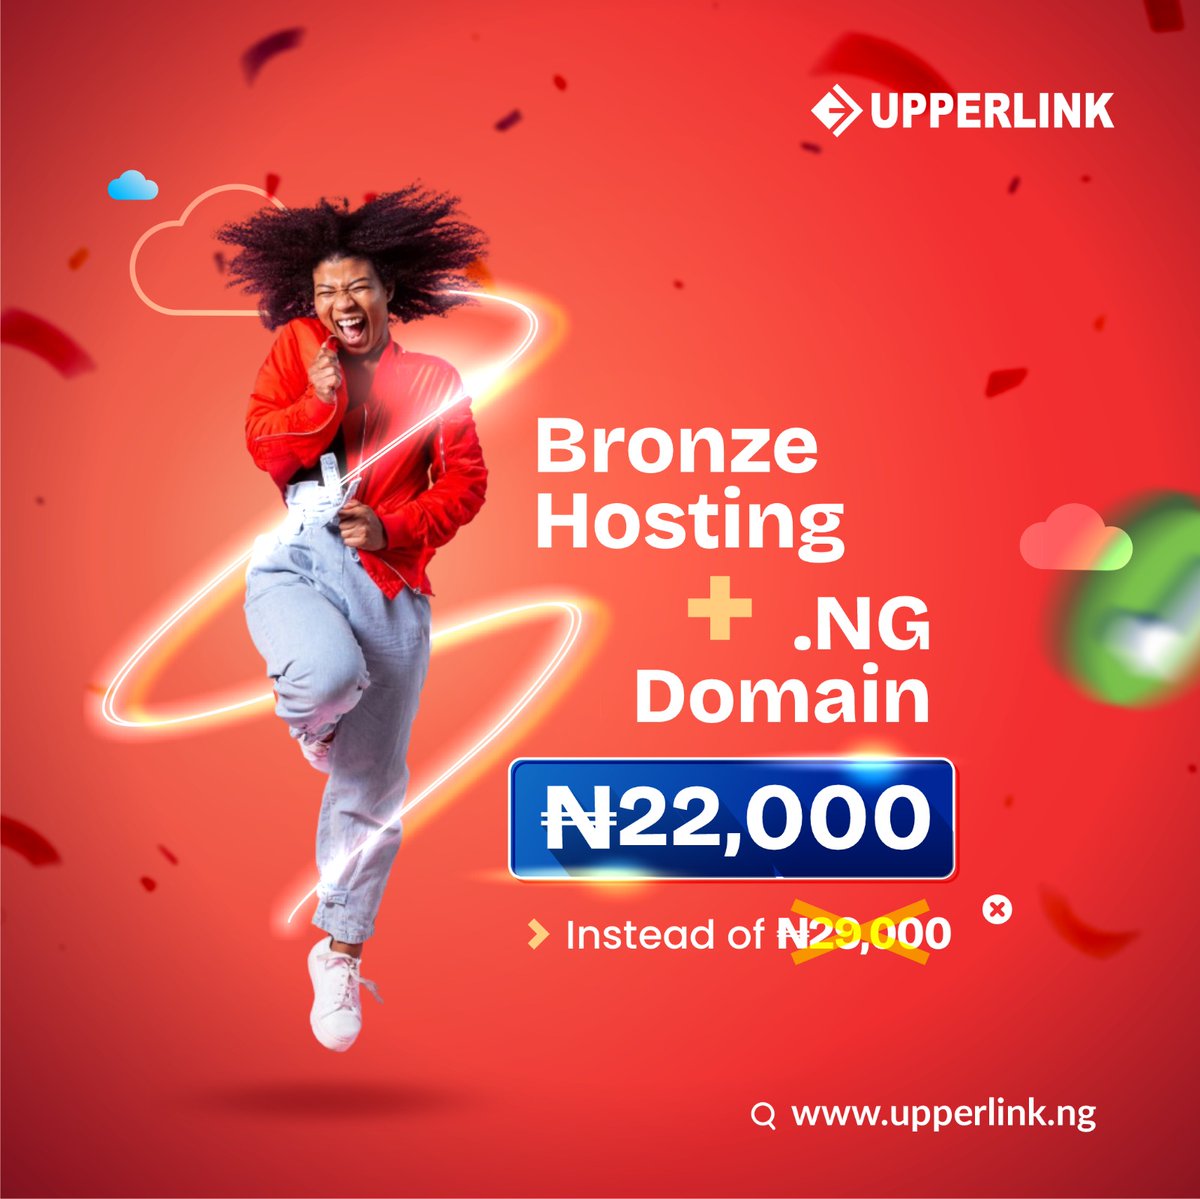 Unlock big savings! Get our bronze hosting with a .ng domain for N22,000 or our basic hosting with a .com .ng domain for N15,000. Don't miss out on this chance to save big! 💰 
#HostingDeals #SaveNow #domainregistration #upperlinklimited #webhosting #explorepage #makethisviral